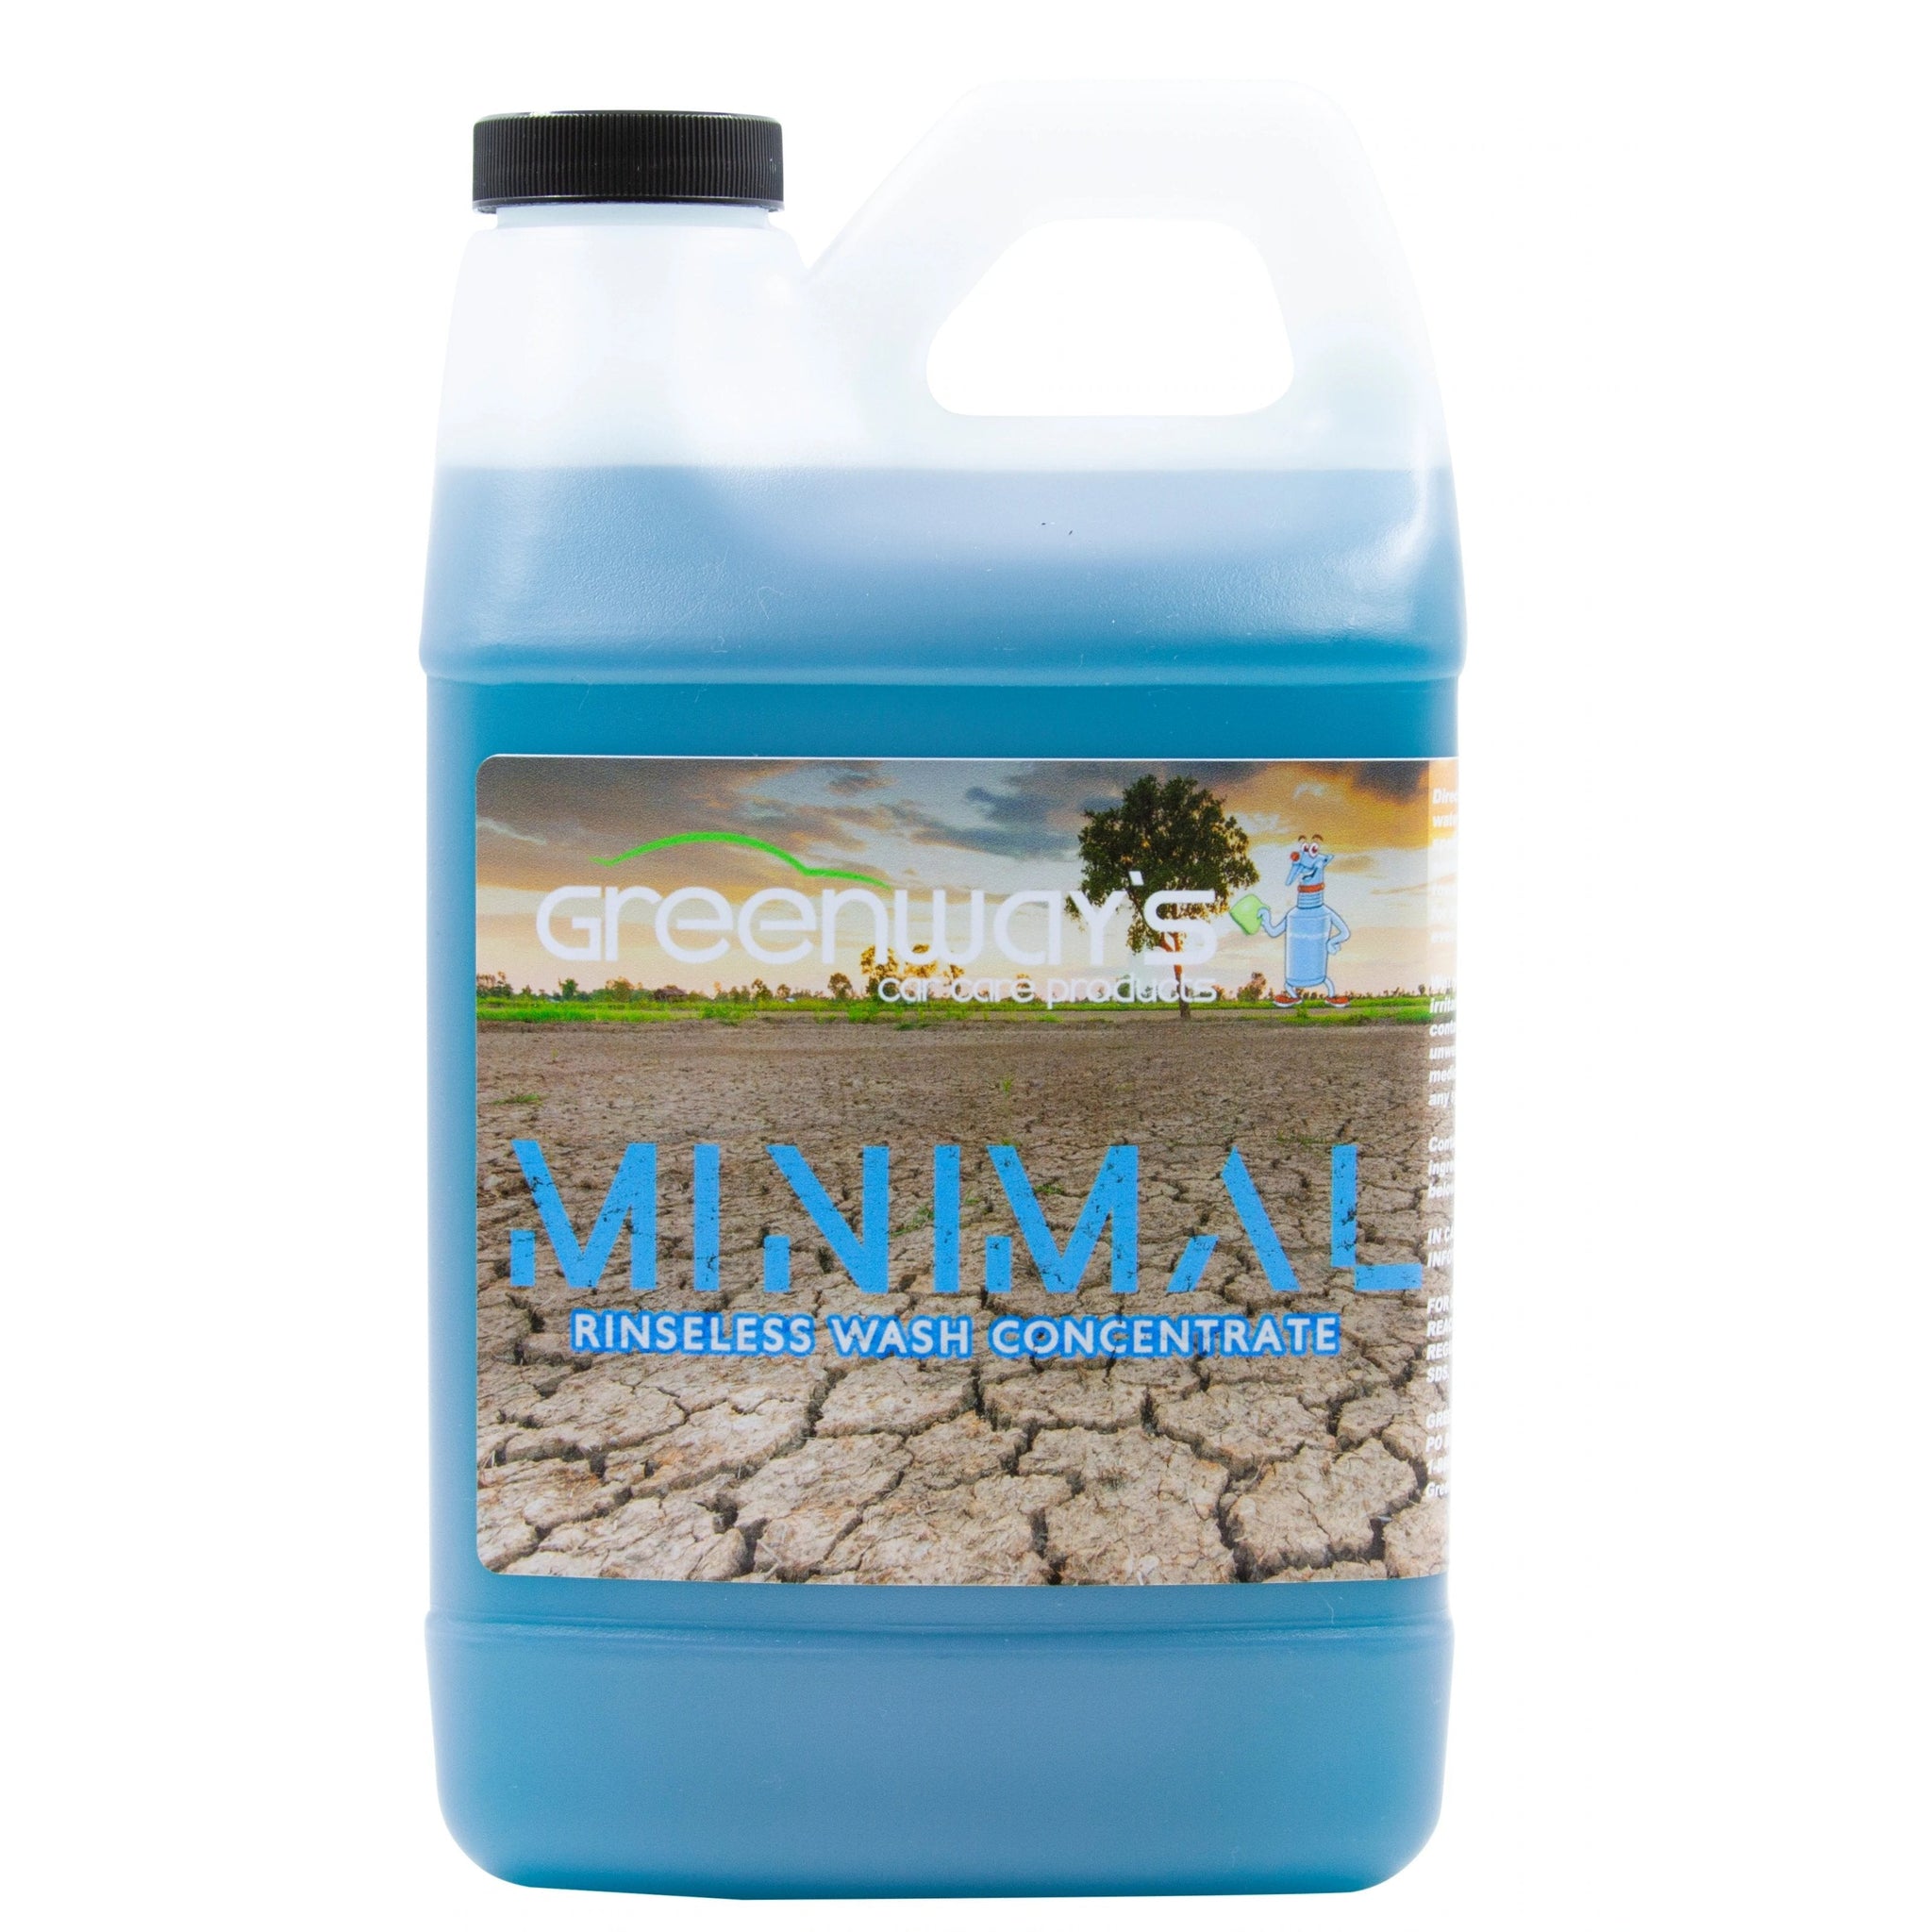 Greenway's Minimal Rinseless Wash Concentrate, waterless car soap, clay lubricant, interior detailer, glass cleaner, 64 ounces.